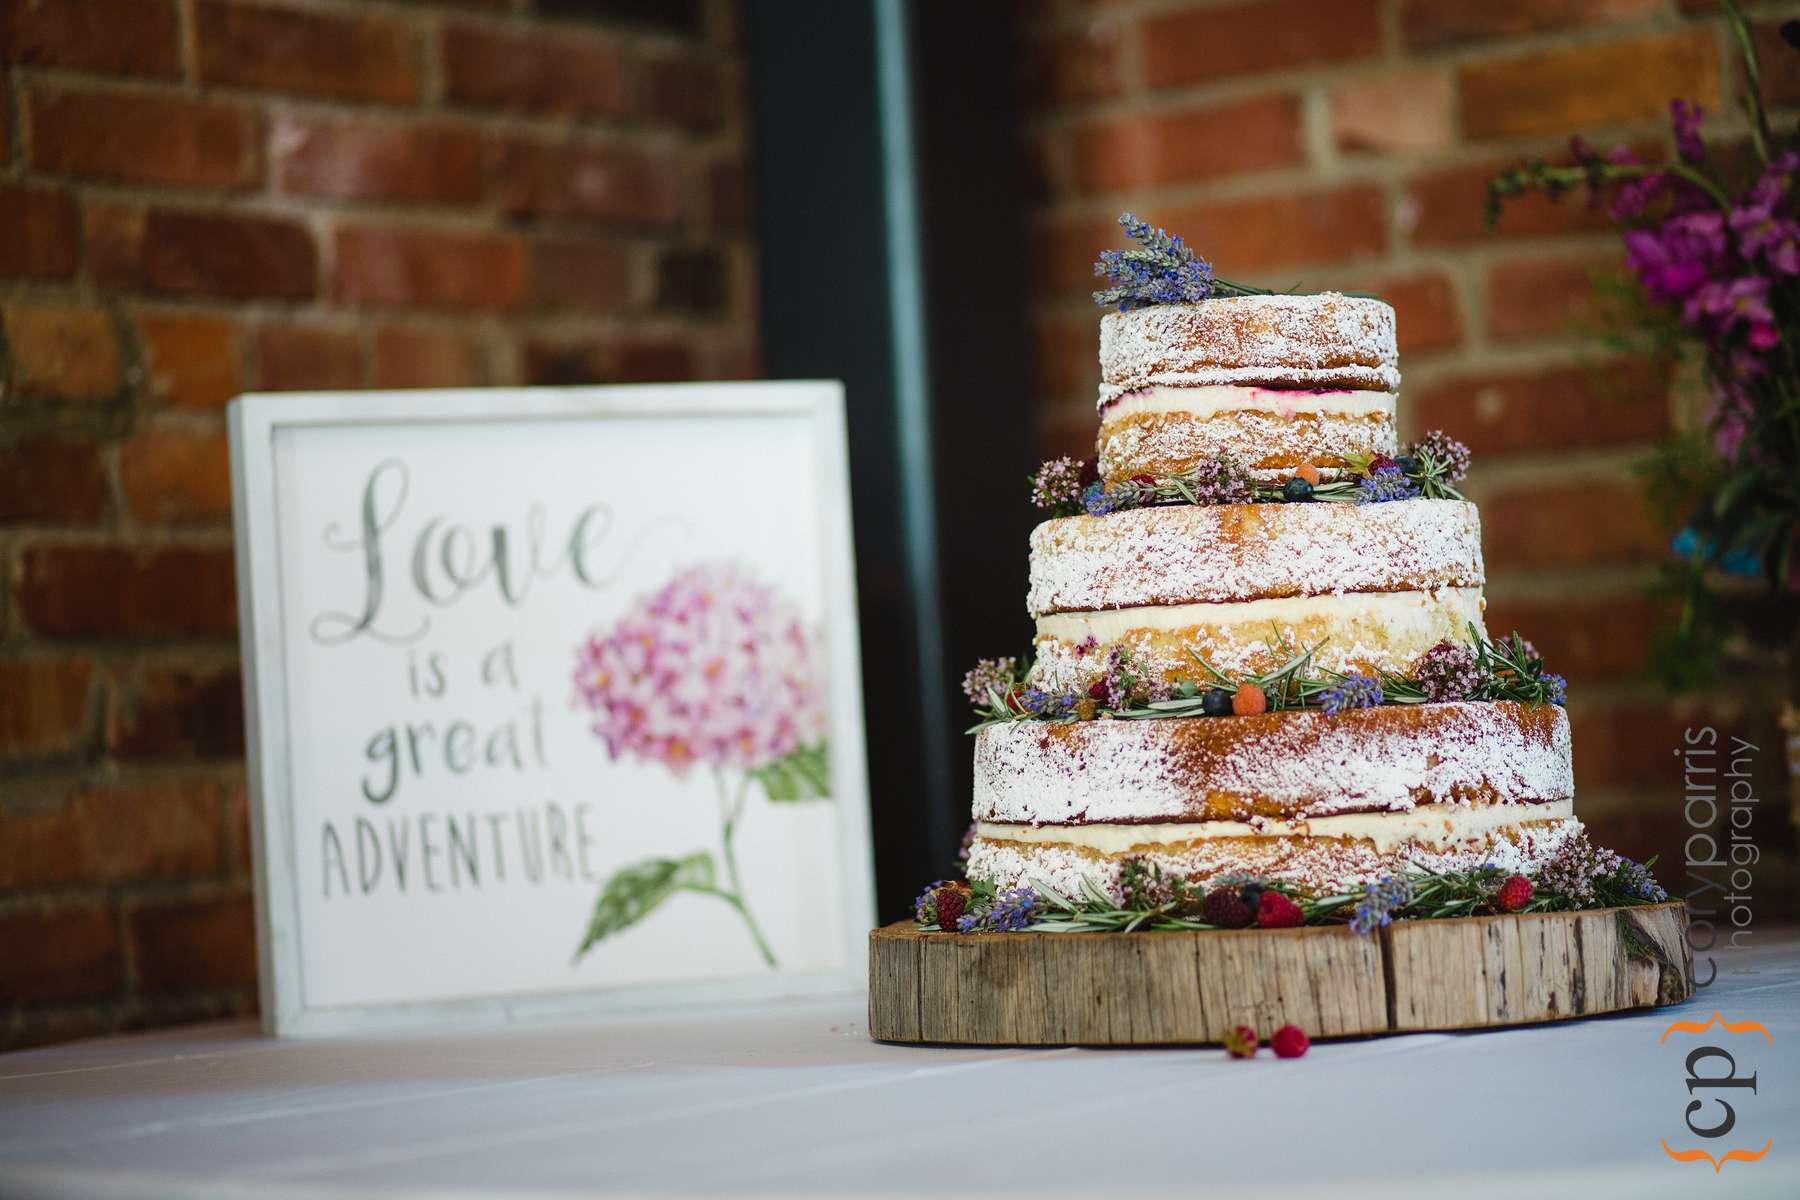 Very cool naked cake